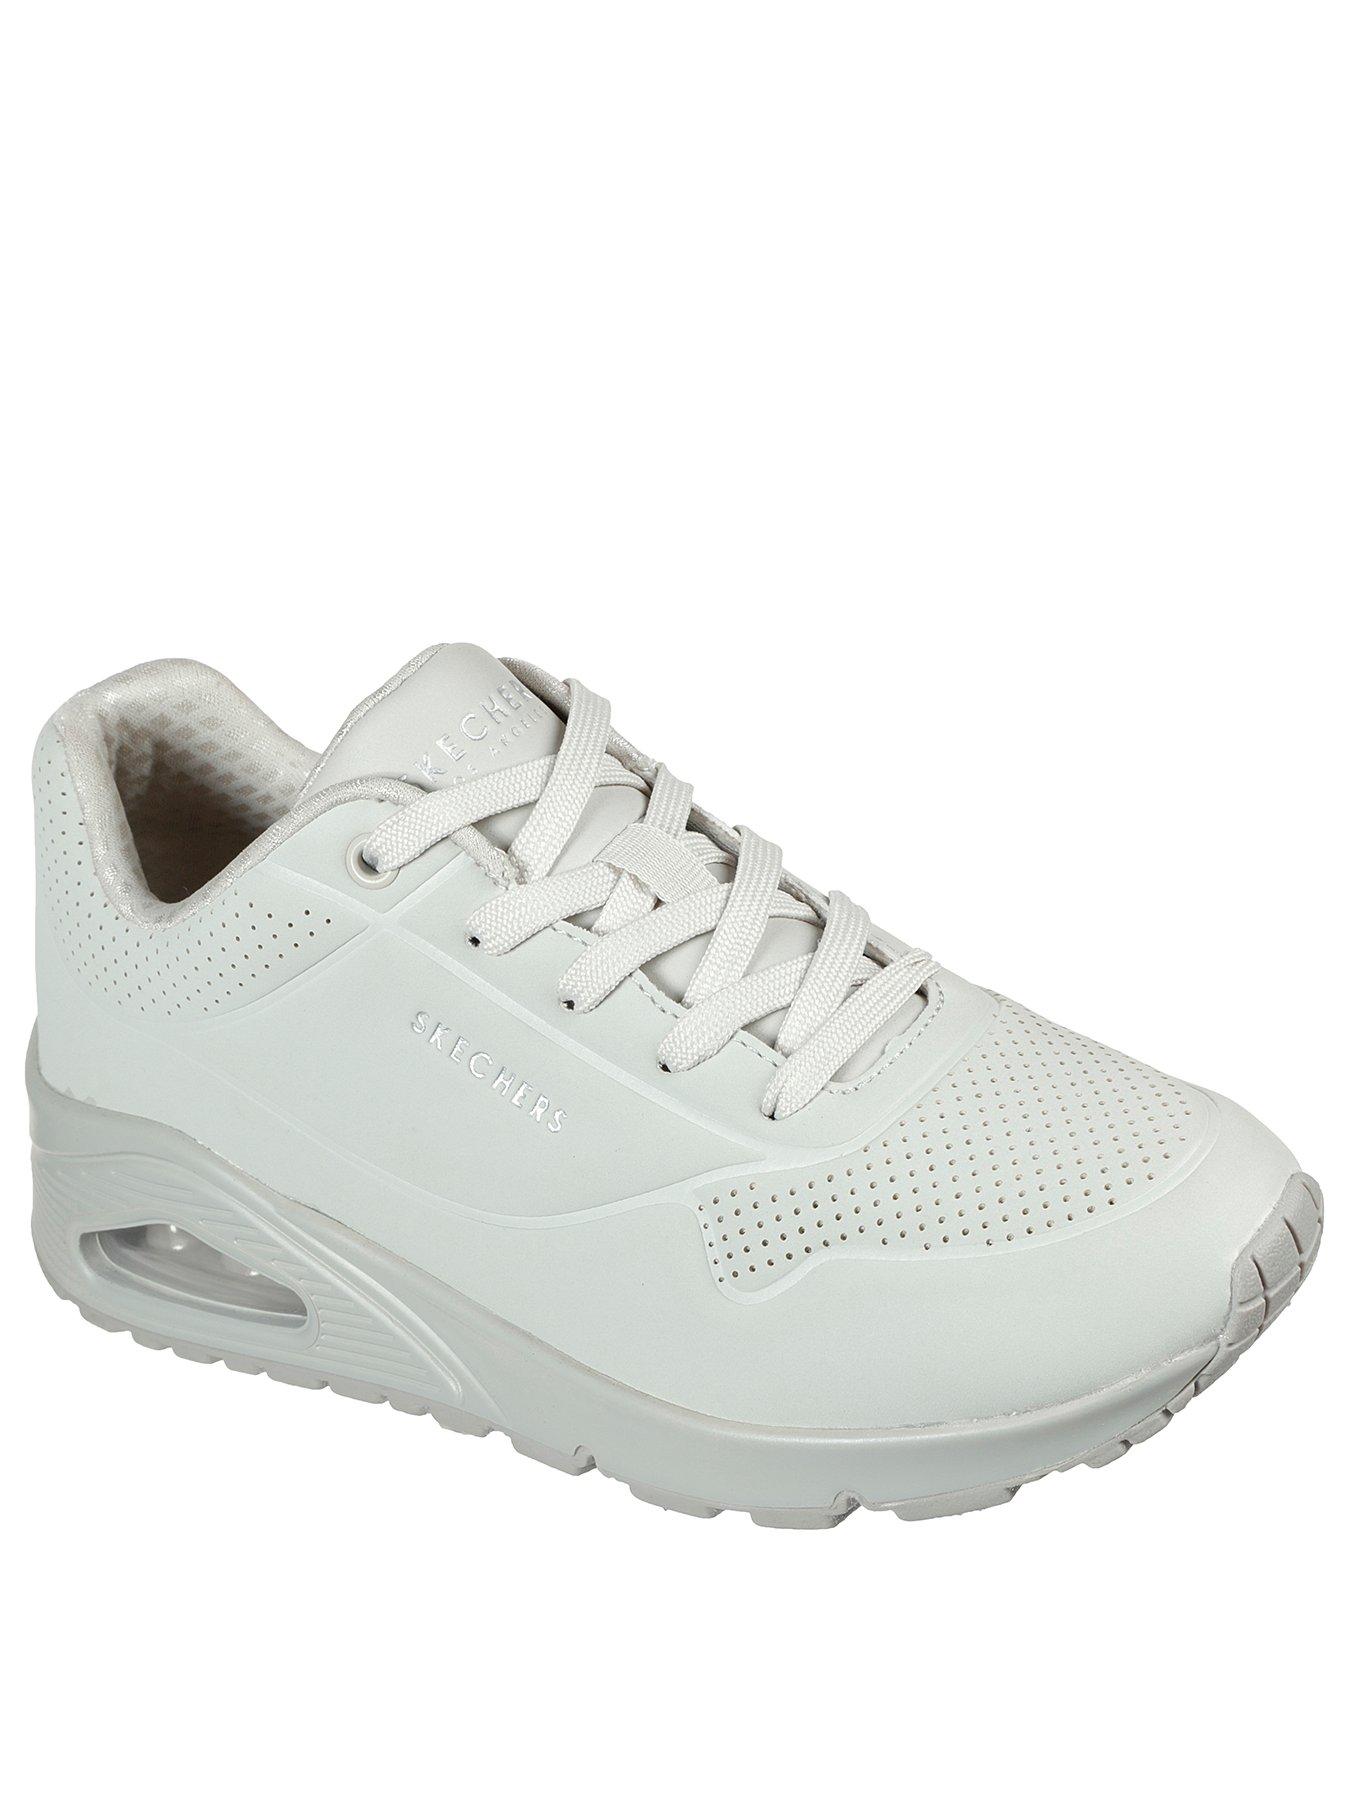 Skechers Uno Stand On Air Durabuck Lace Up Trainers | very.co.uk